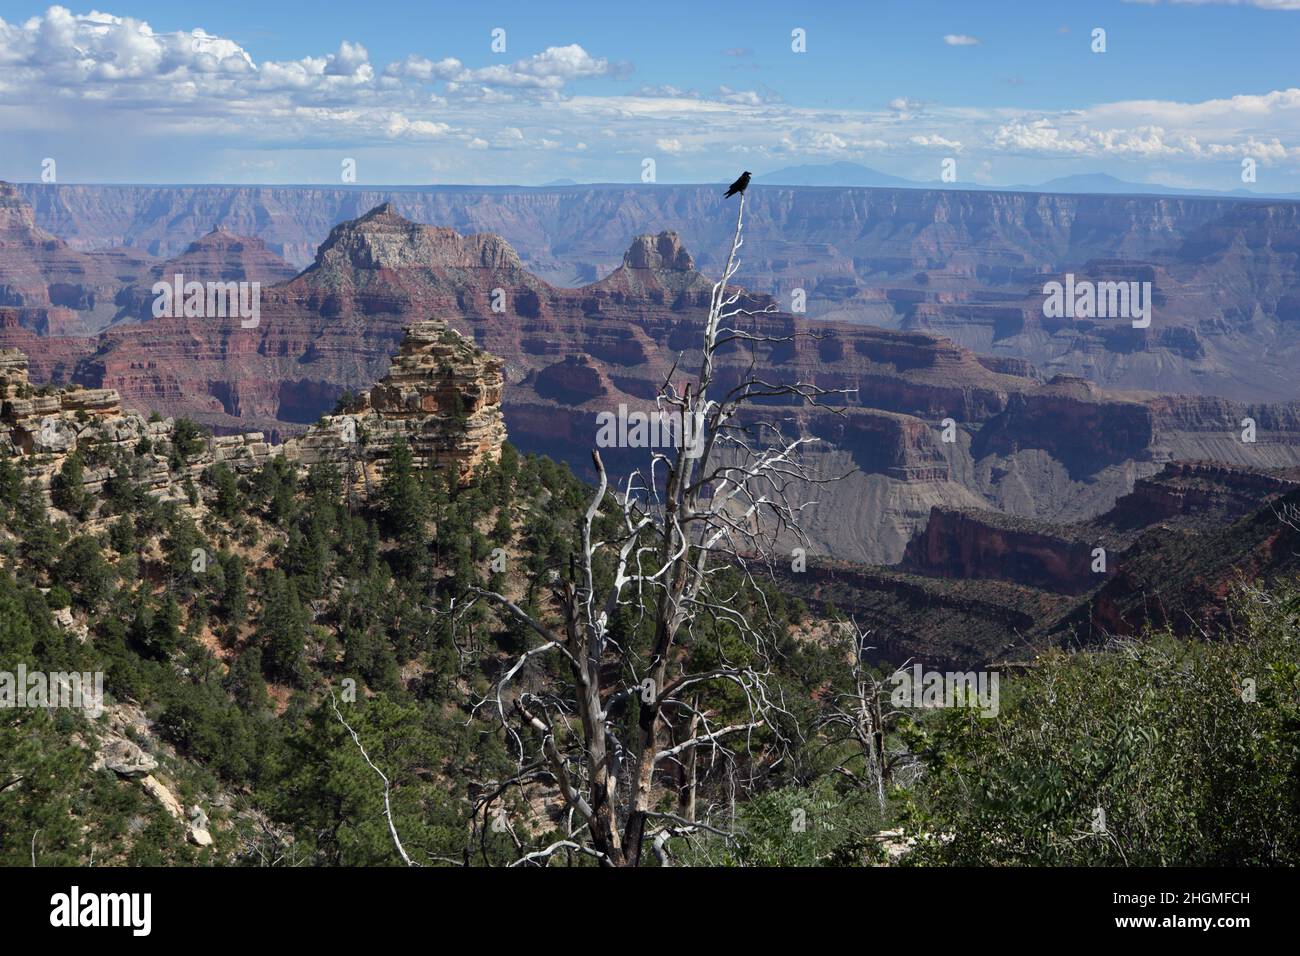 View from the North Rim of the Grand Canyon at Widforss Point. One of the crows that lives in the area perches on a dead pine tree in the foreground Stock Photo